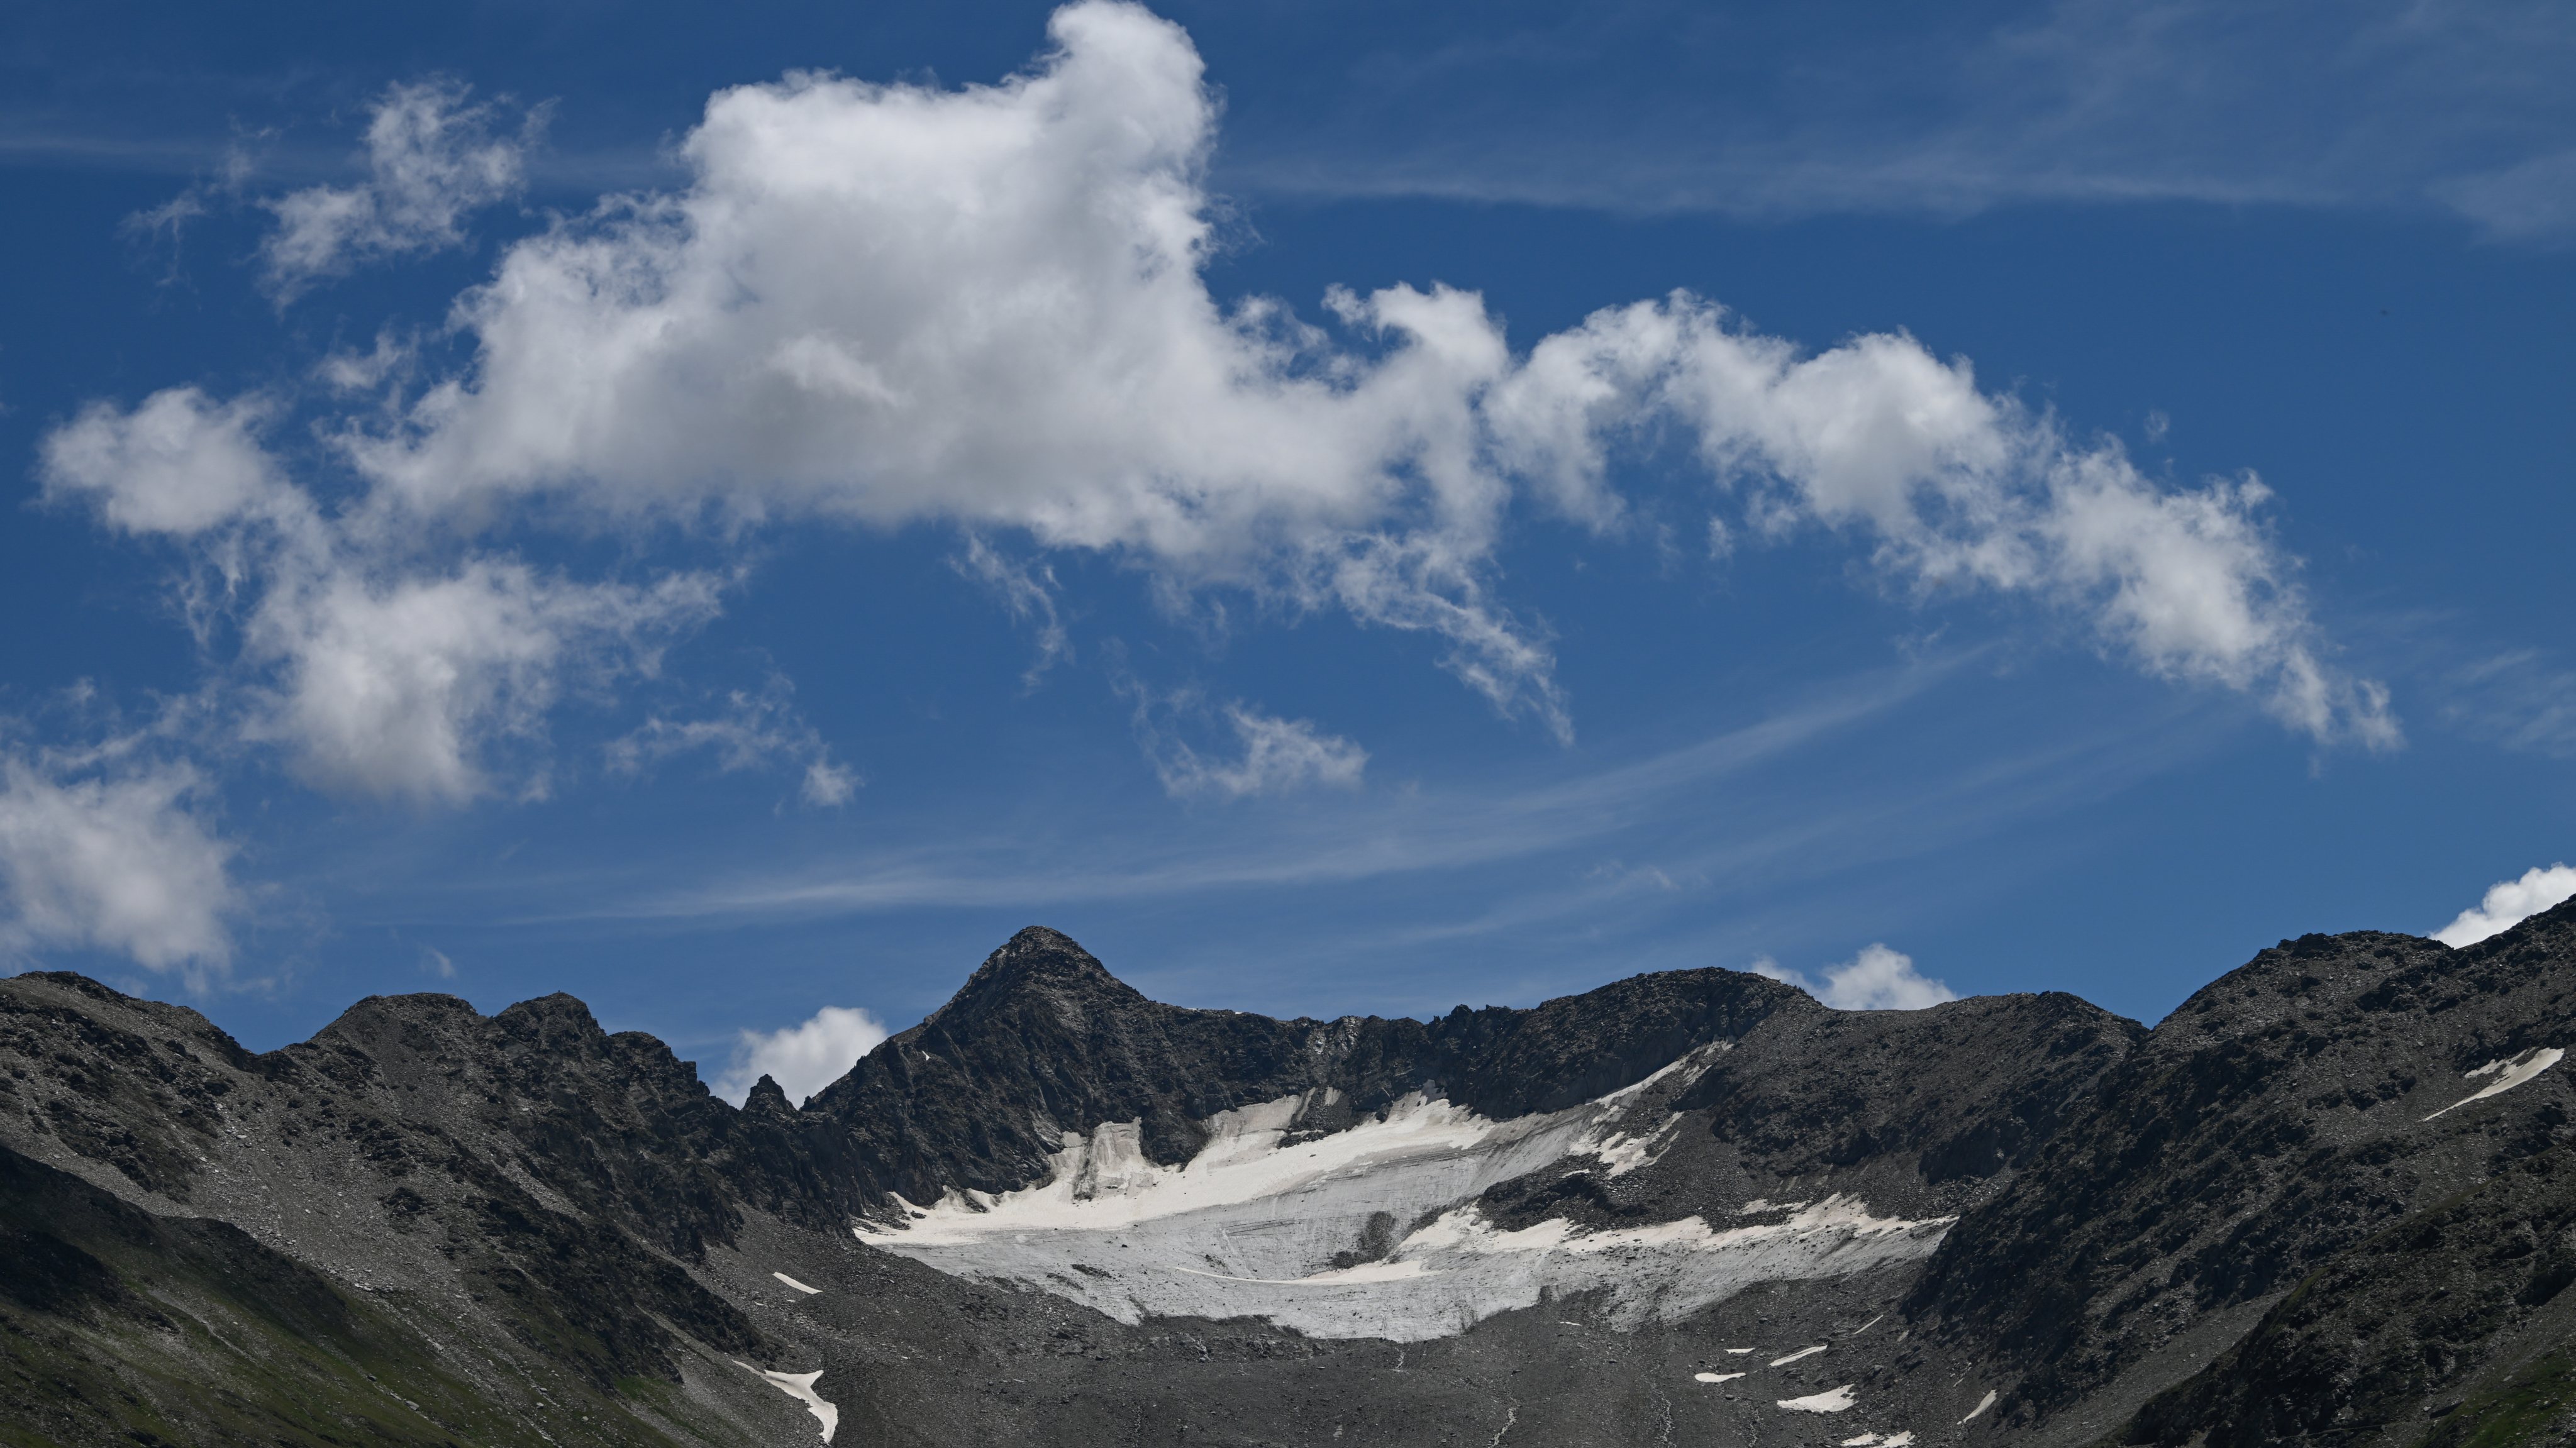 Effects of climate crisis on glaciers of the Swiss Alps